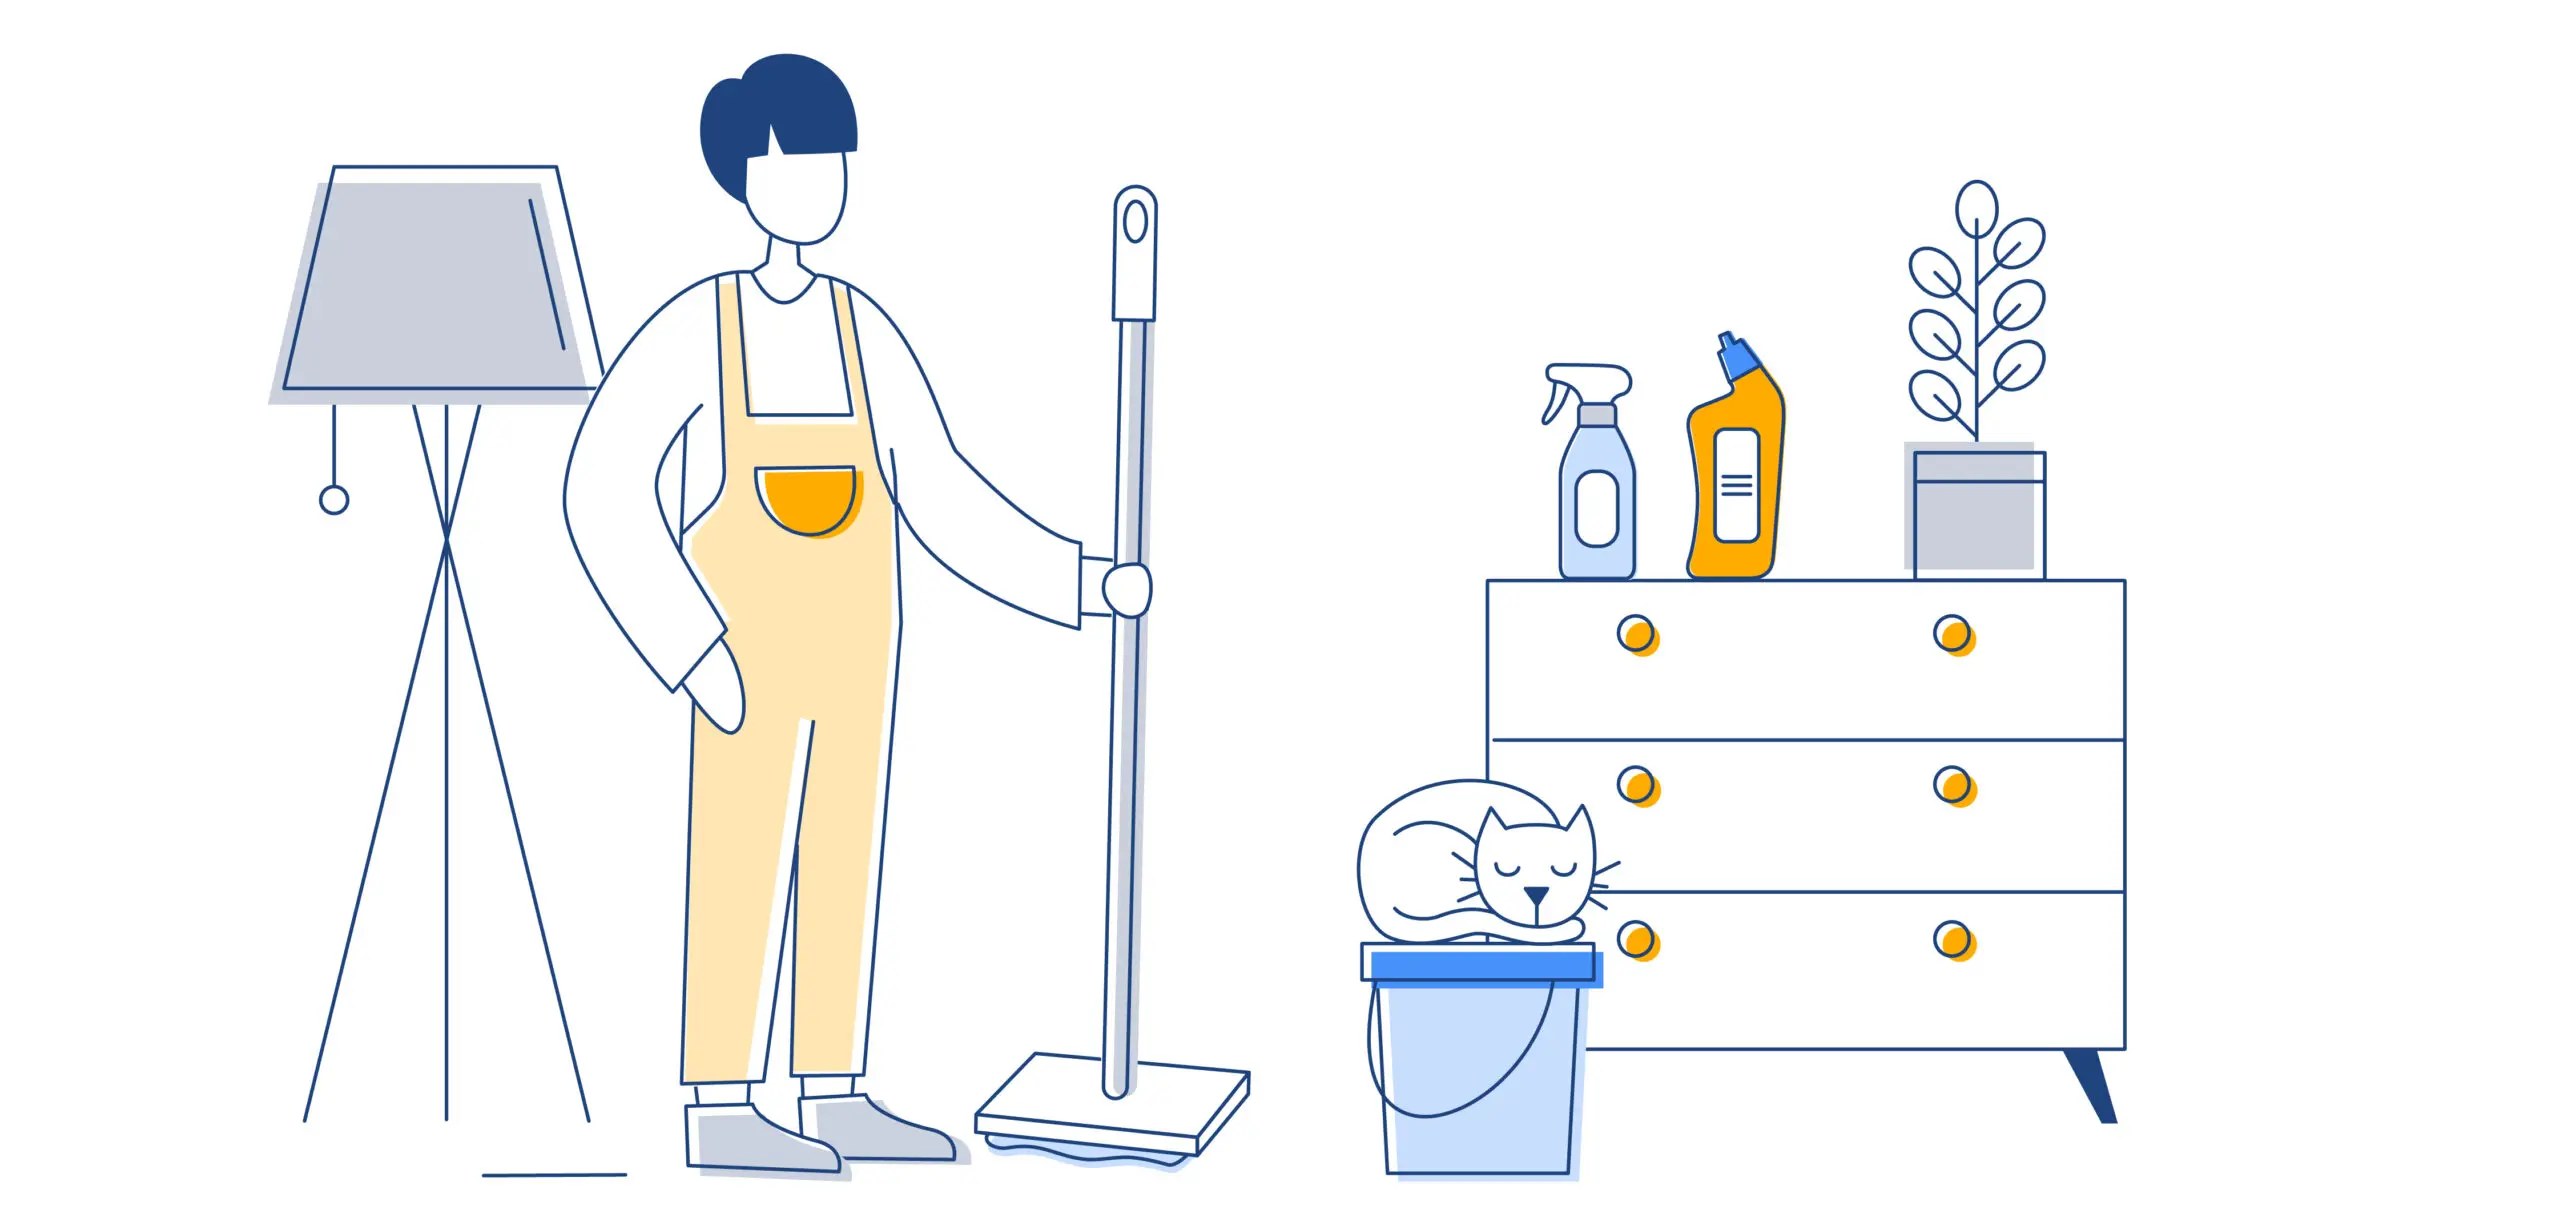 What is the difference between a domestic and a professional clean? - flatfair